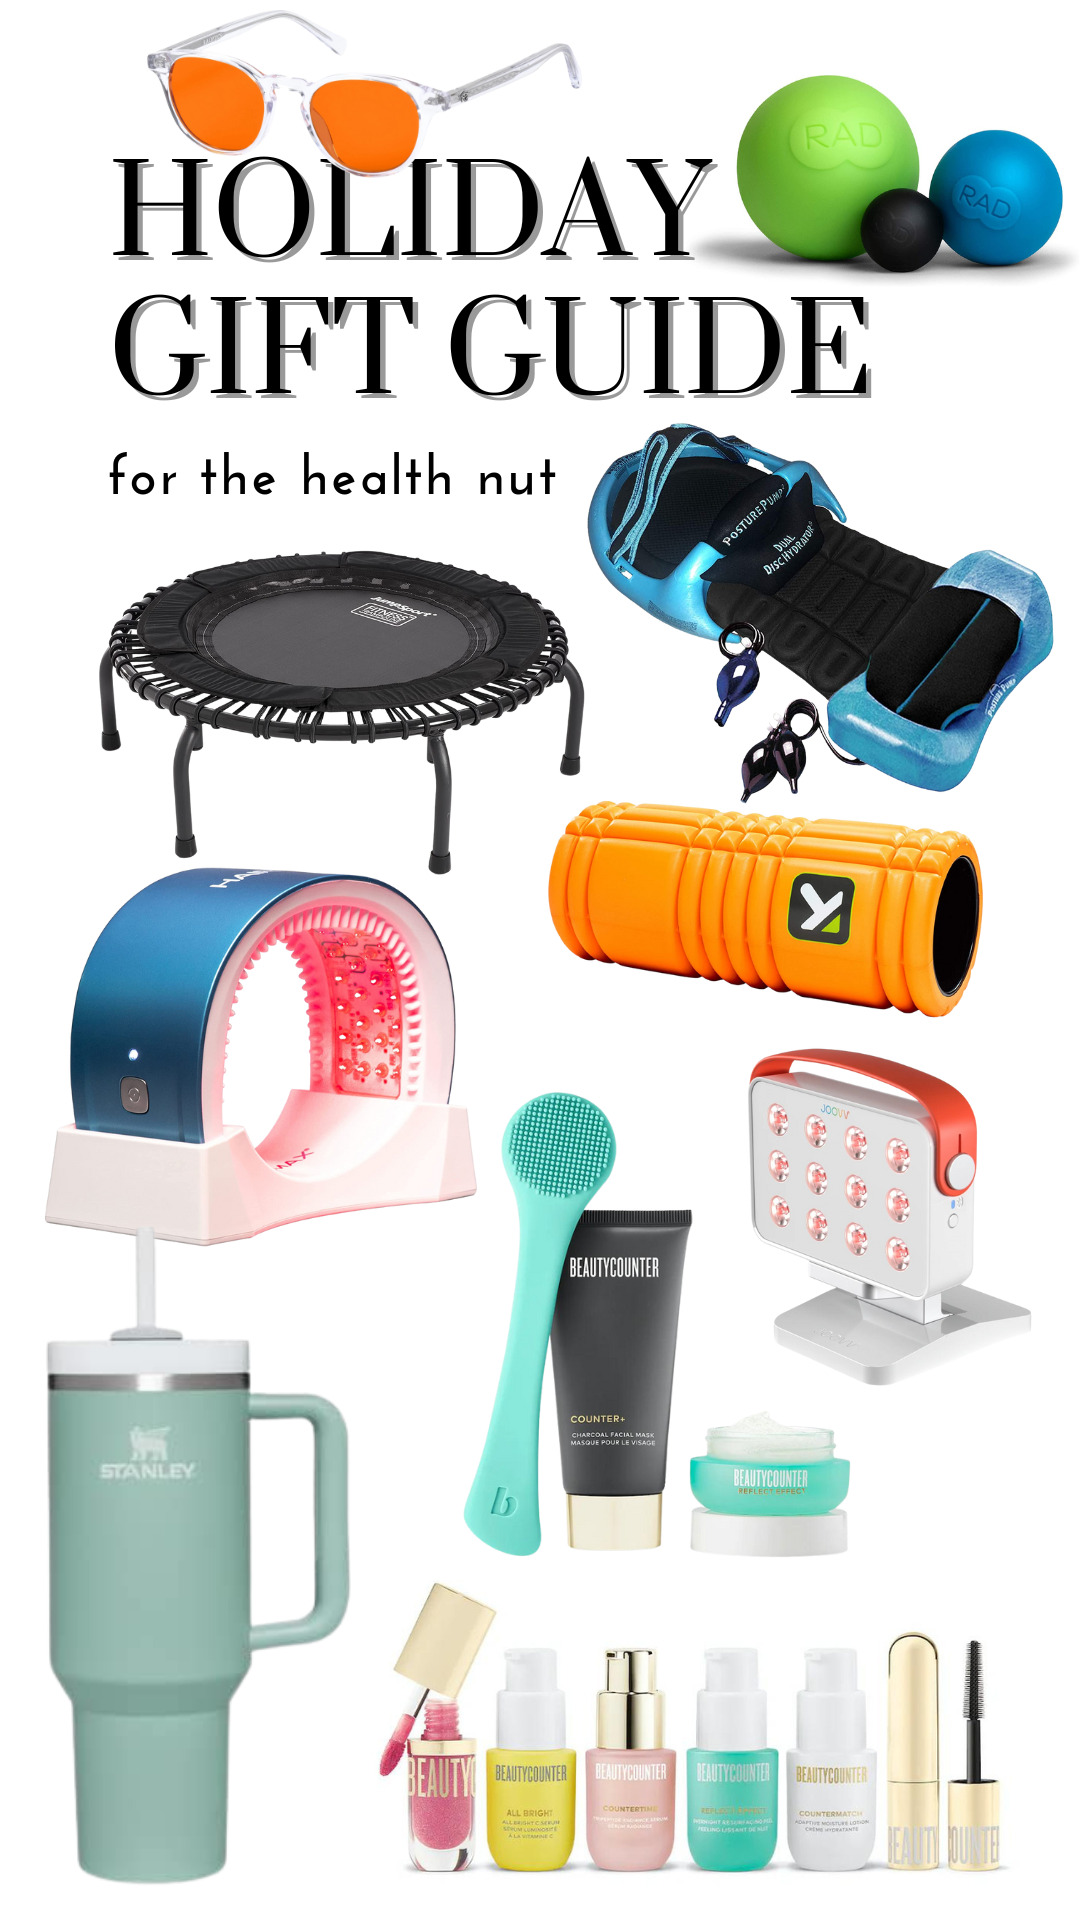 Holiday Gift Guide for the Health Nut